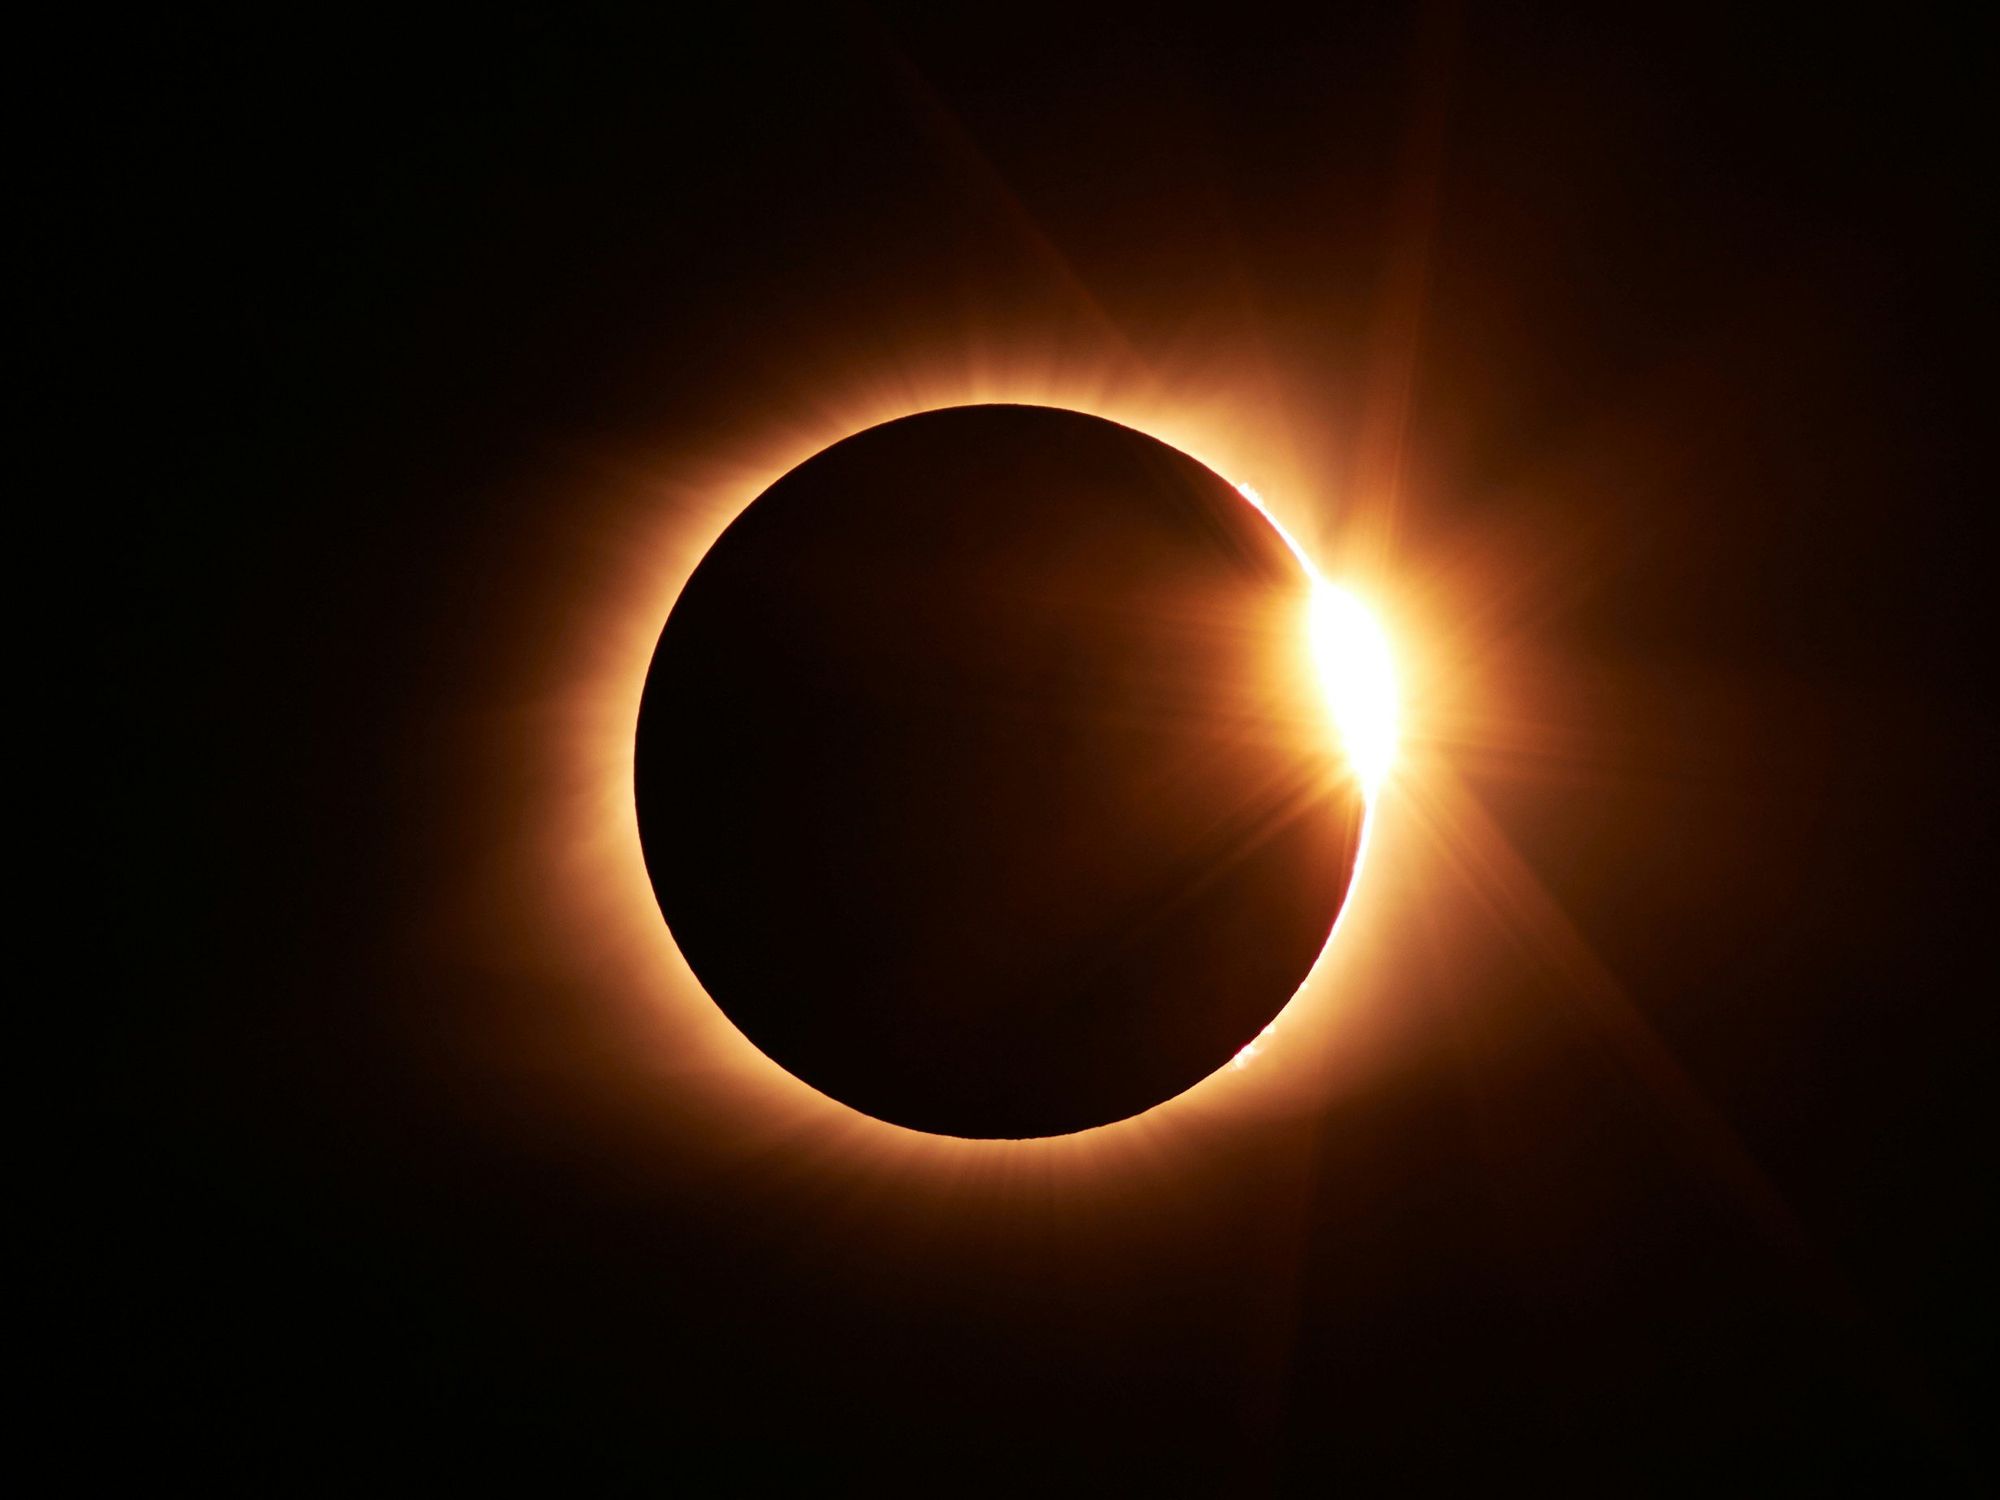 Eclipse photography